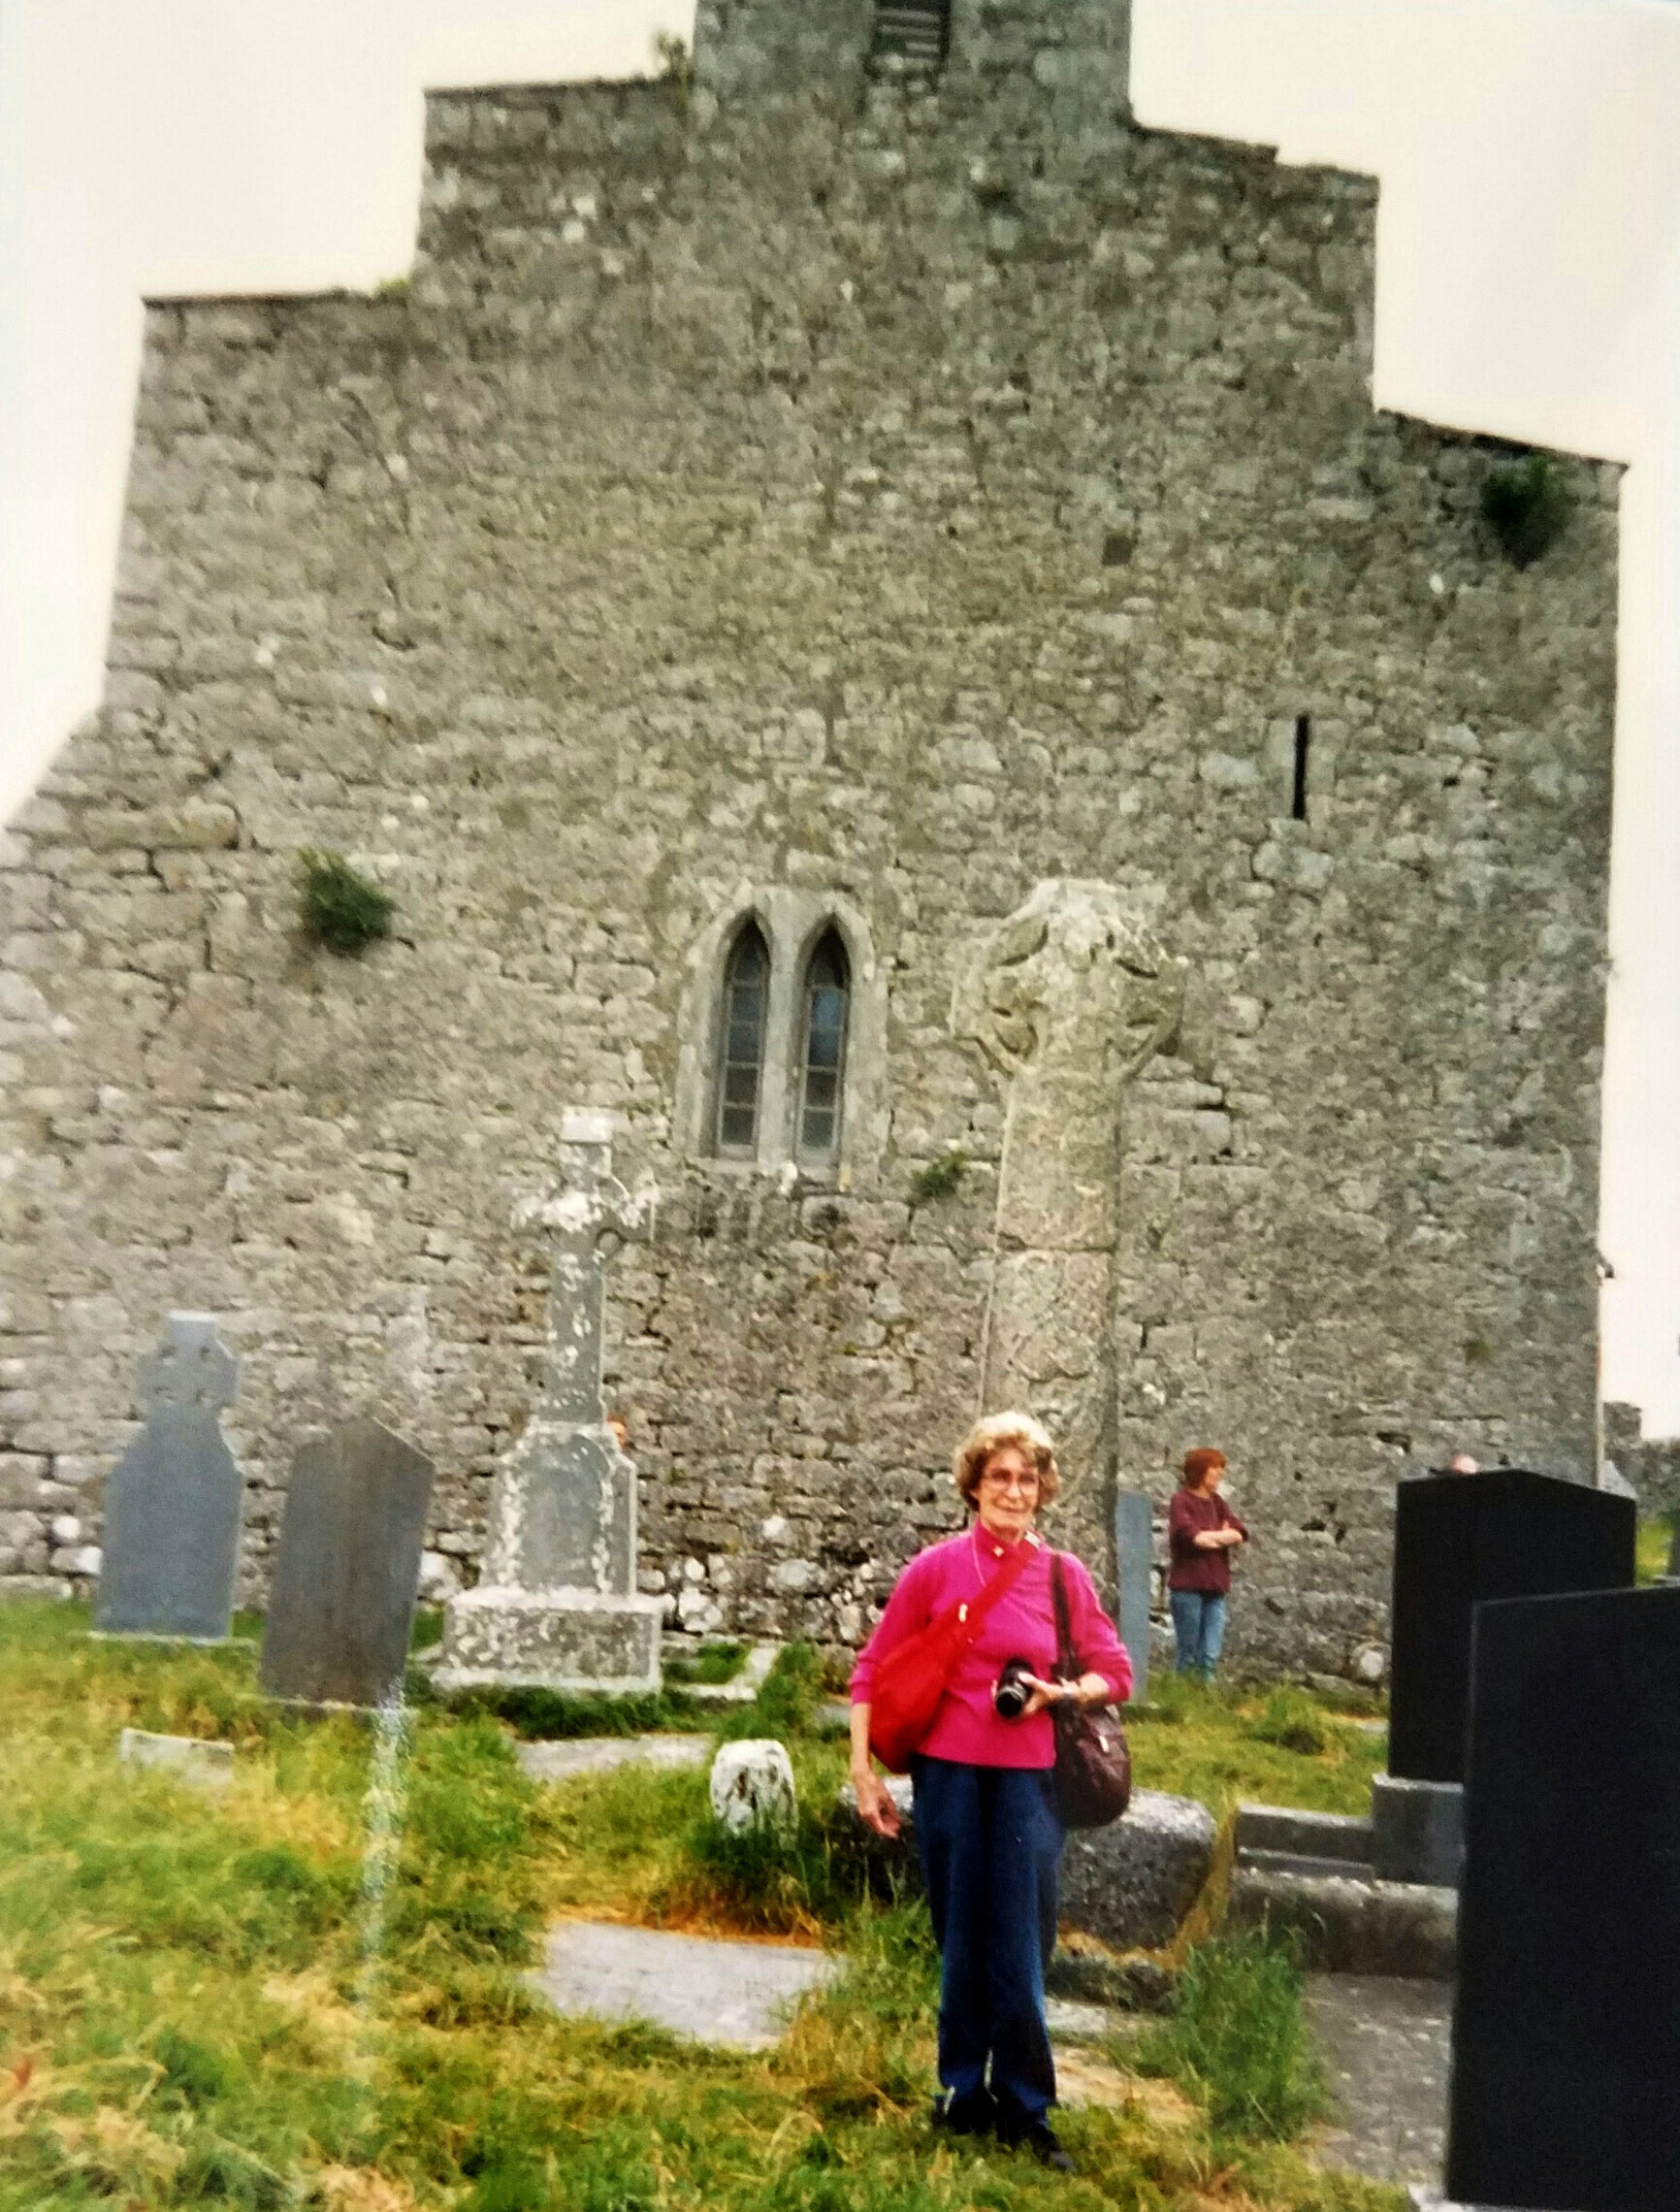 The author's grandmother, Mary Catherine "Cay" Maguire Coyle visiting Ireland in 1989.